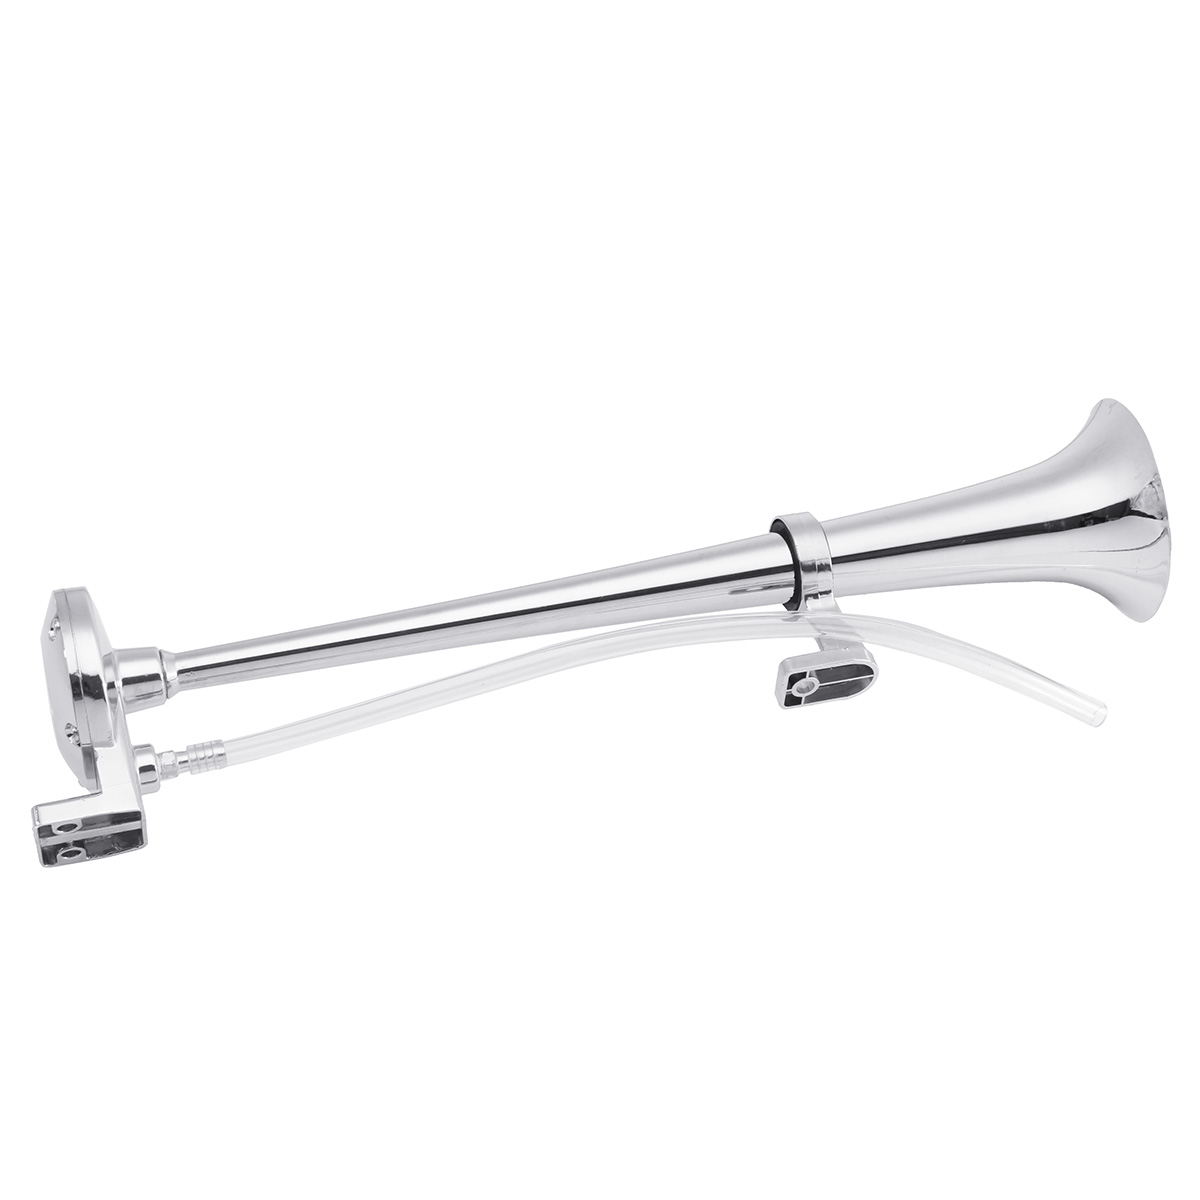 12V 178Db Trumpet Air Horn with Compressor Super Loud Single Chrome Universal for Boat Train Car